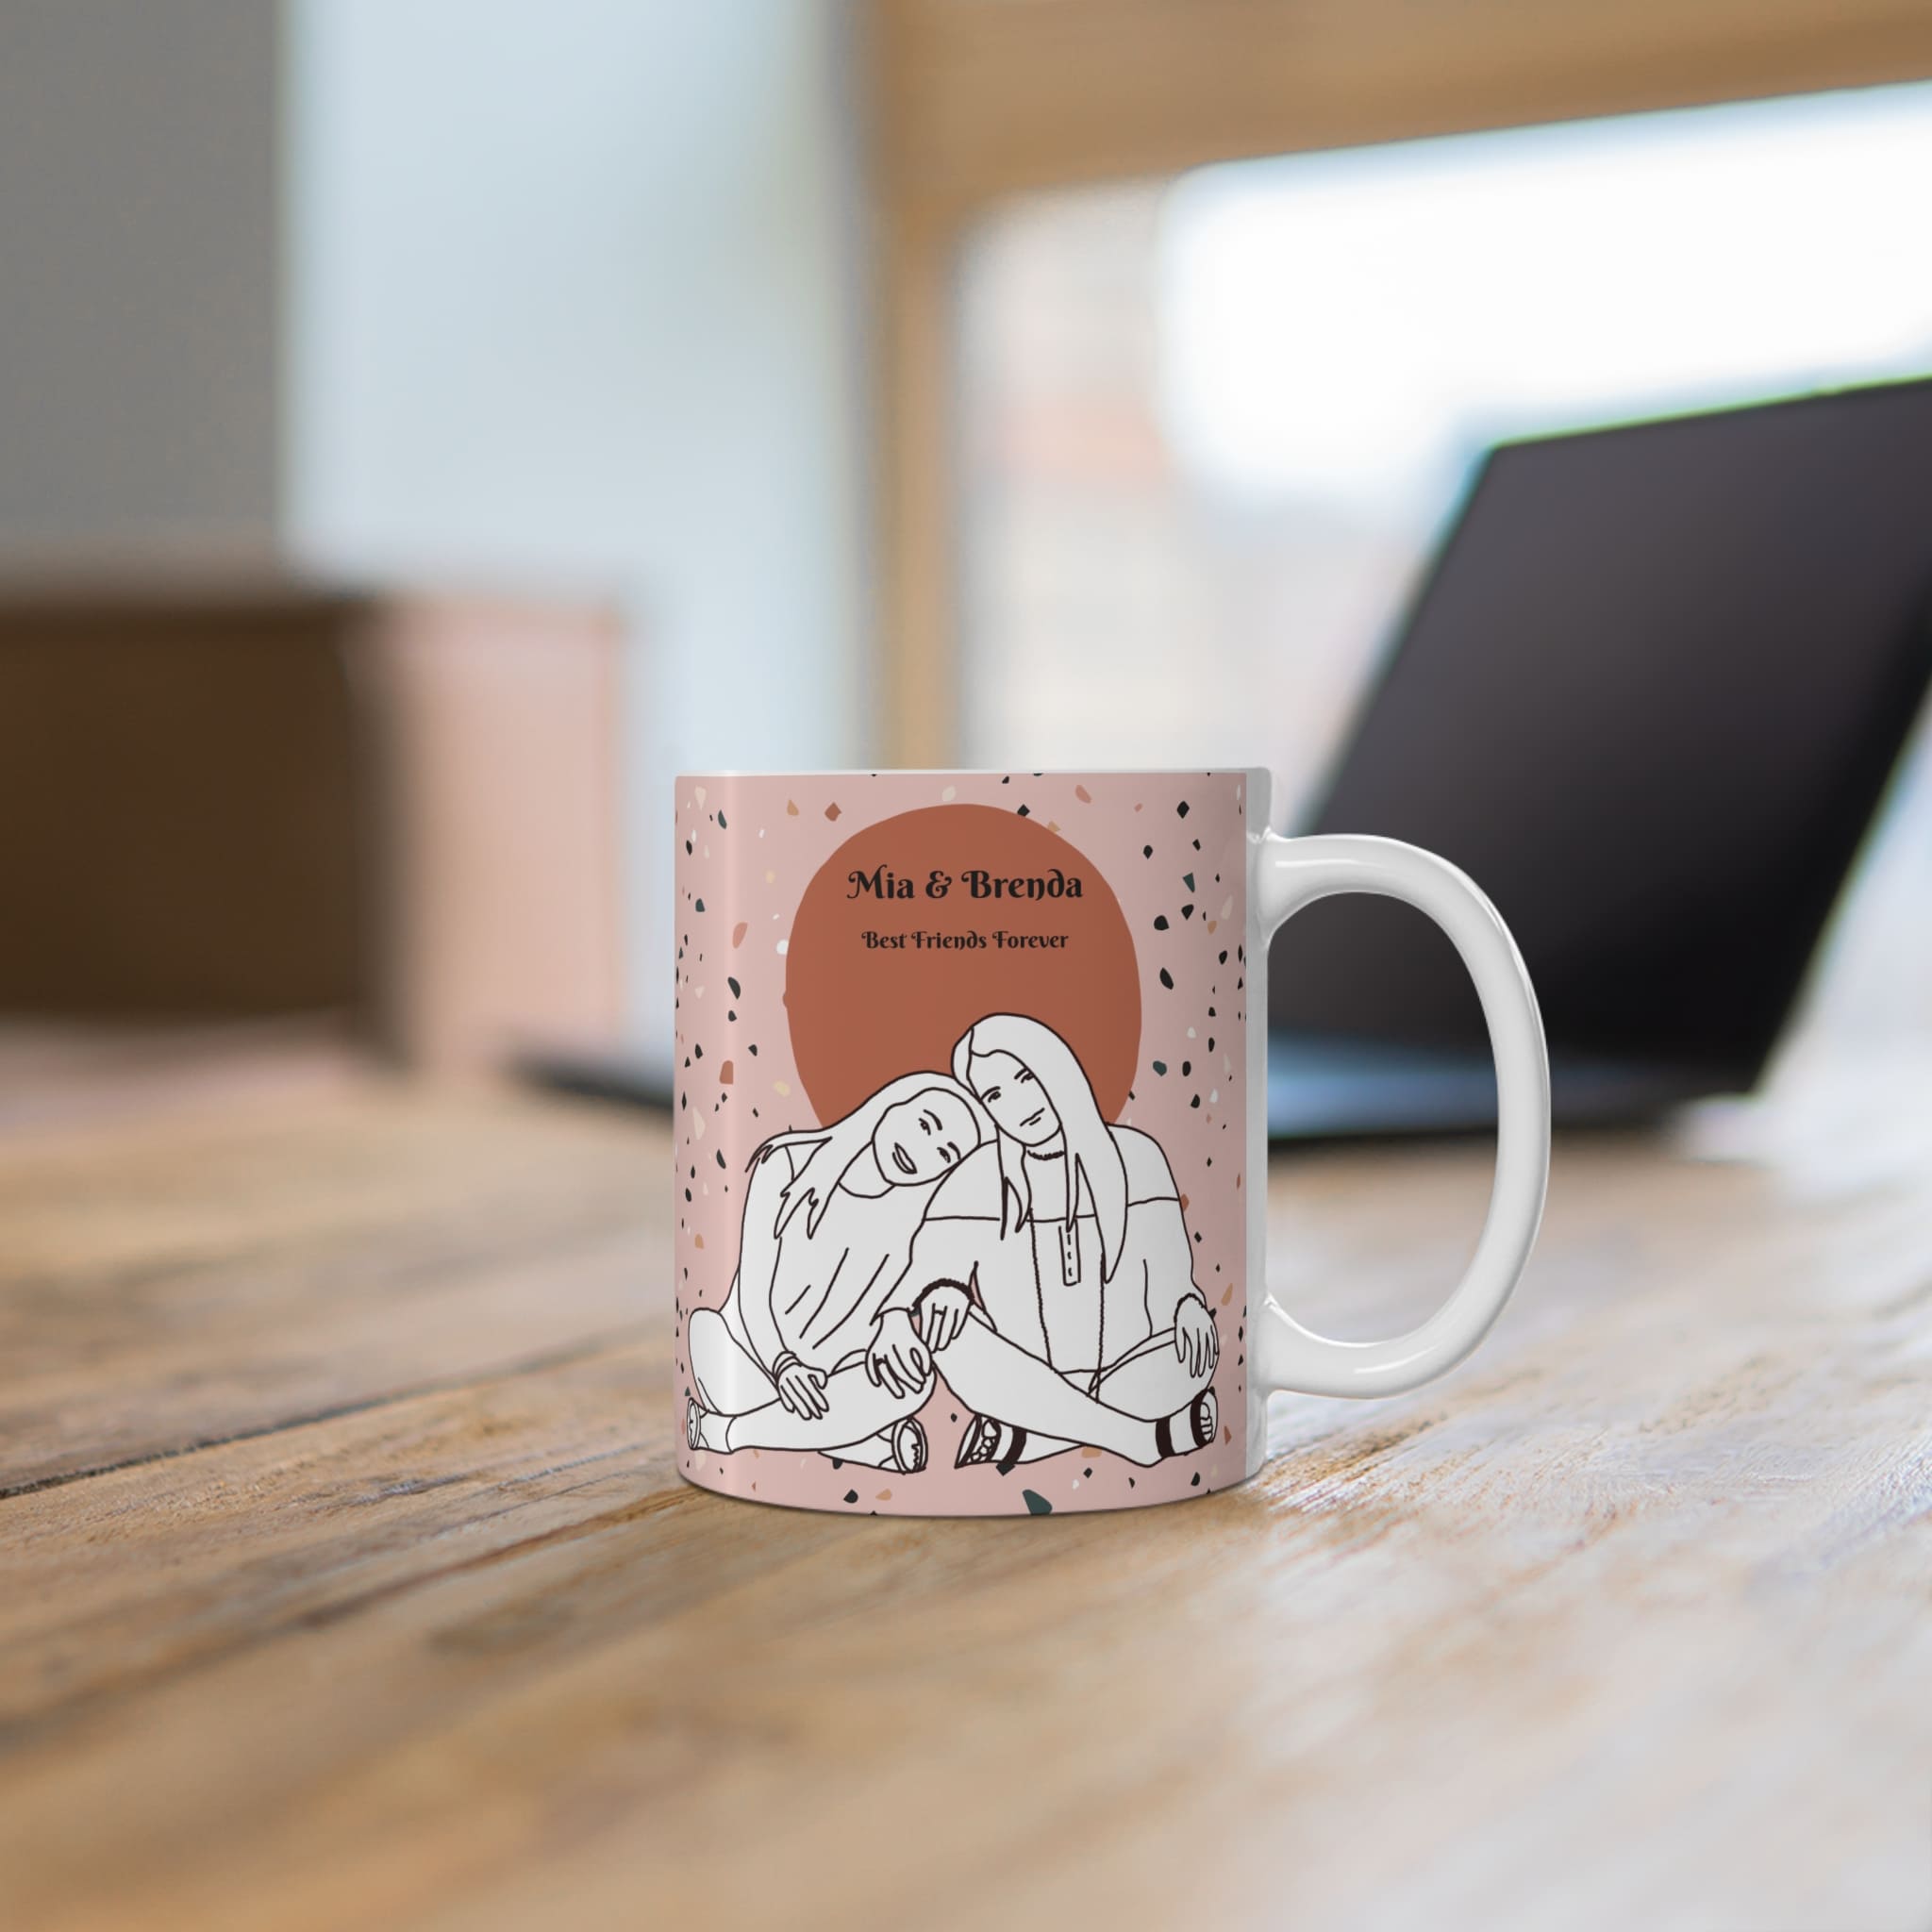 custom line art mug for best friends with portrait illustration from photo on fashion colored terrazzo back ground contemporary design style 